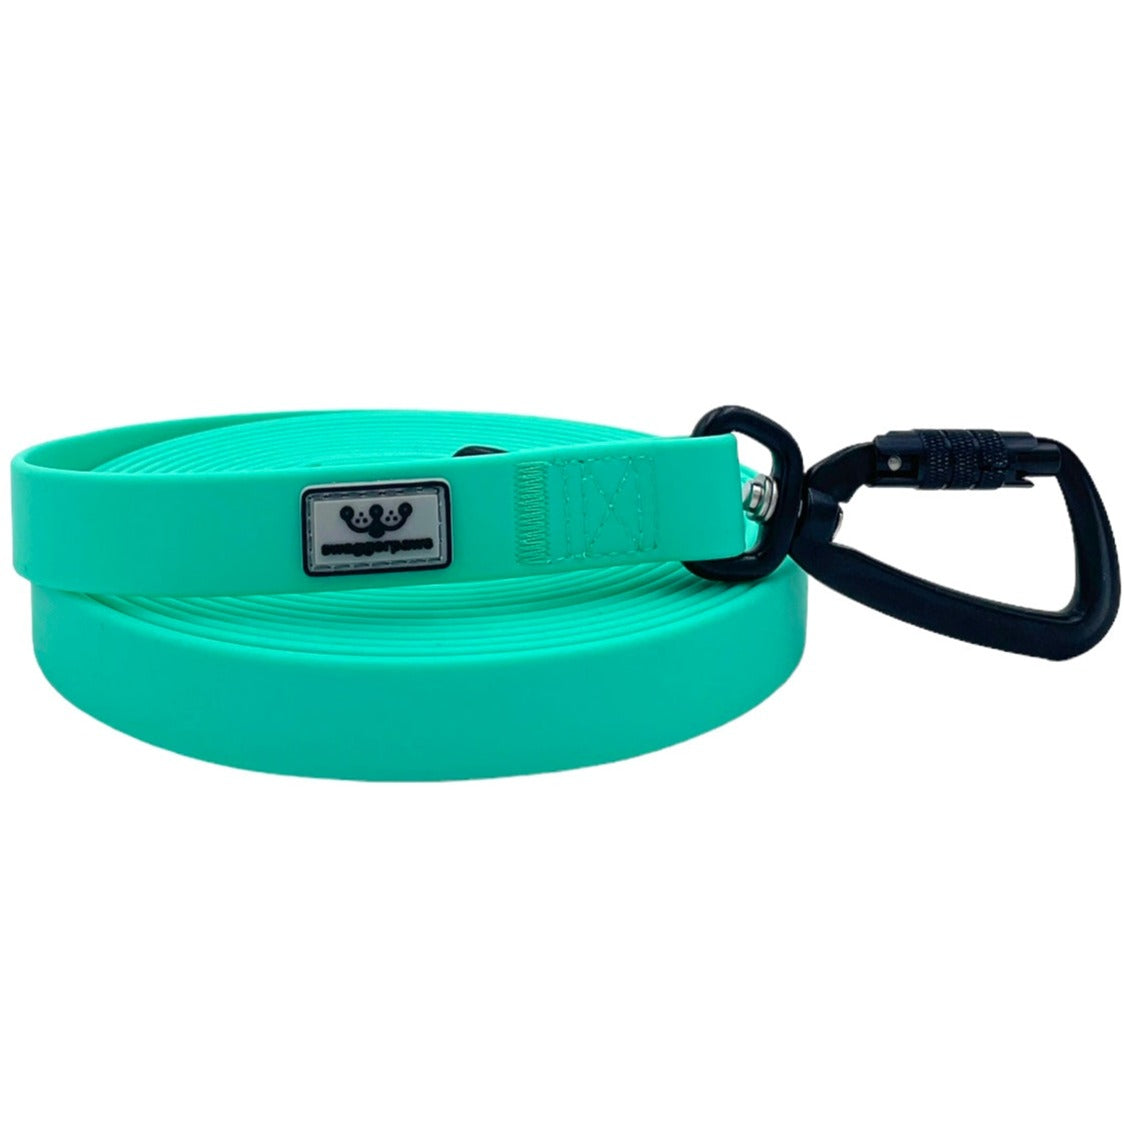 SwaggerPaws waterproof long line dog lead with auto-lock carabiner, spearmint green